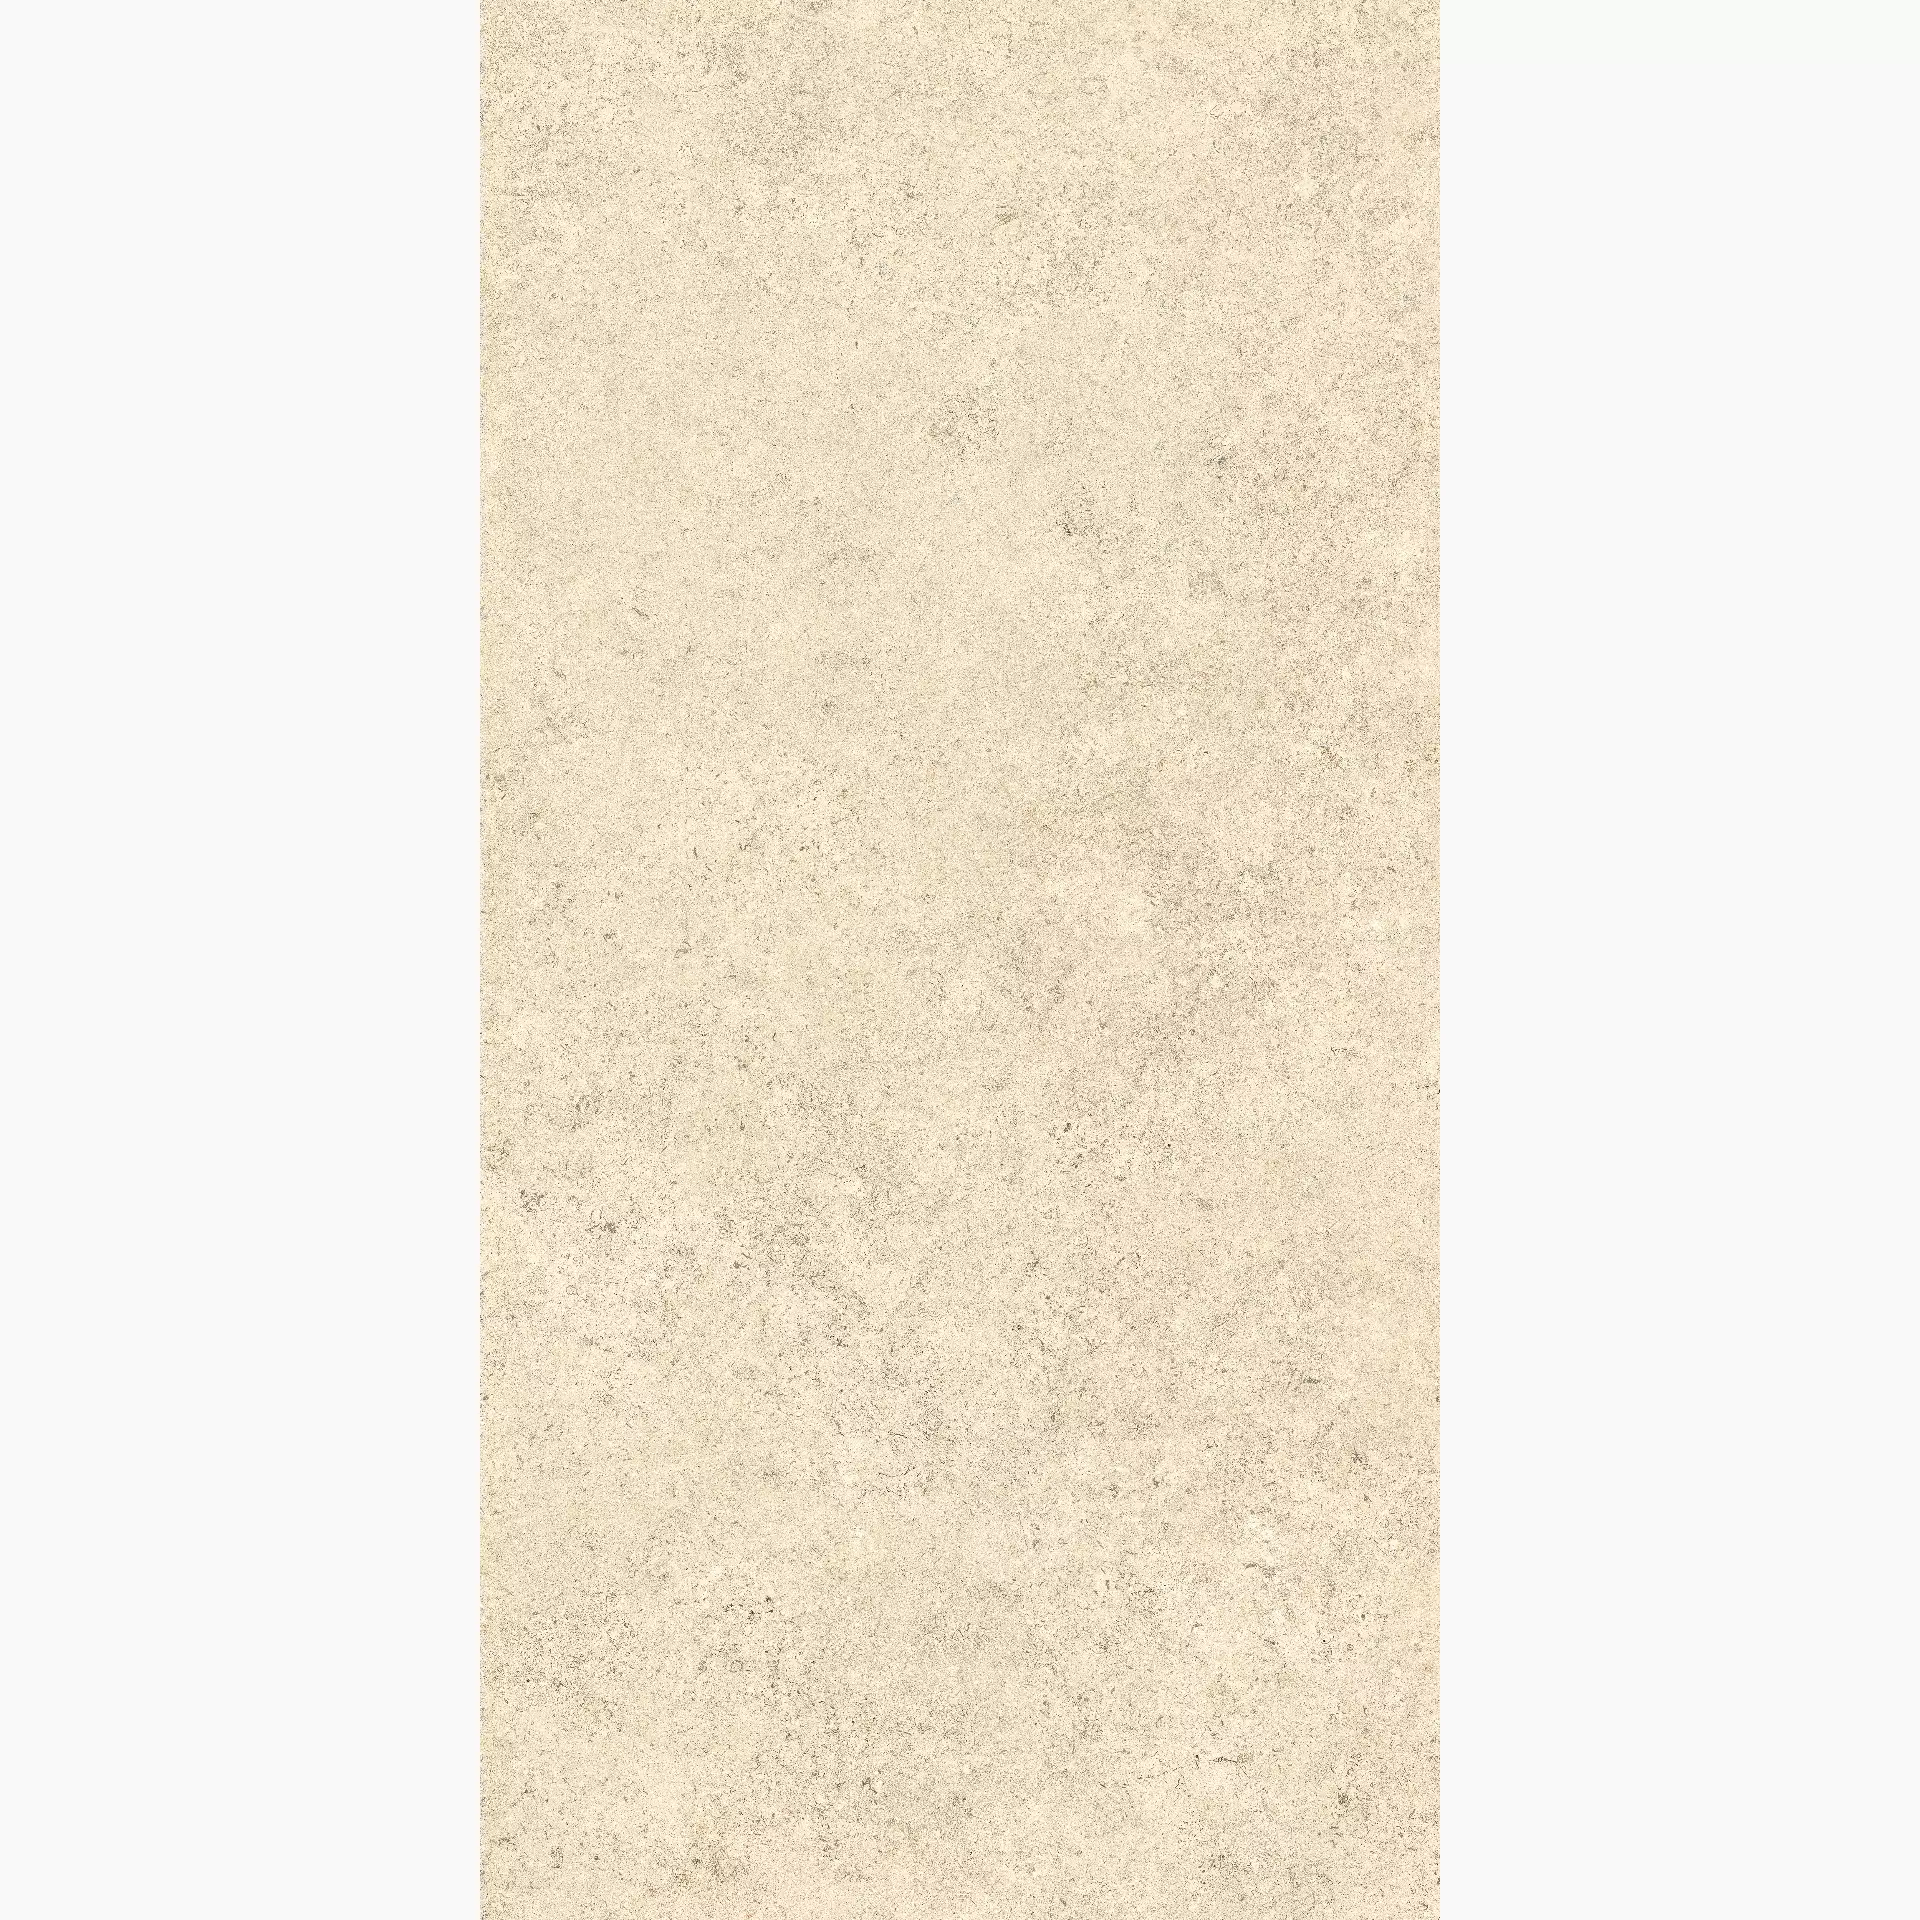 Cottodeste Pura Ivory Hammered Protect EGXPR60 60x120cm rectified 20mm